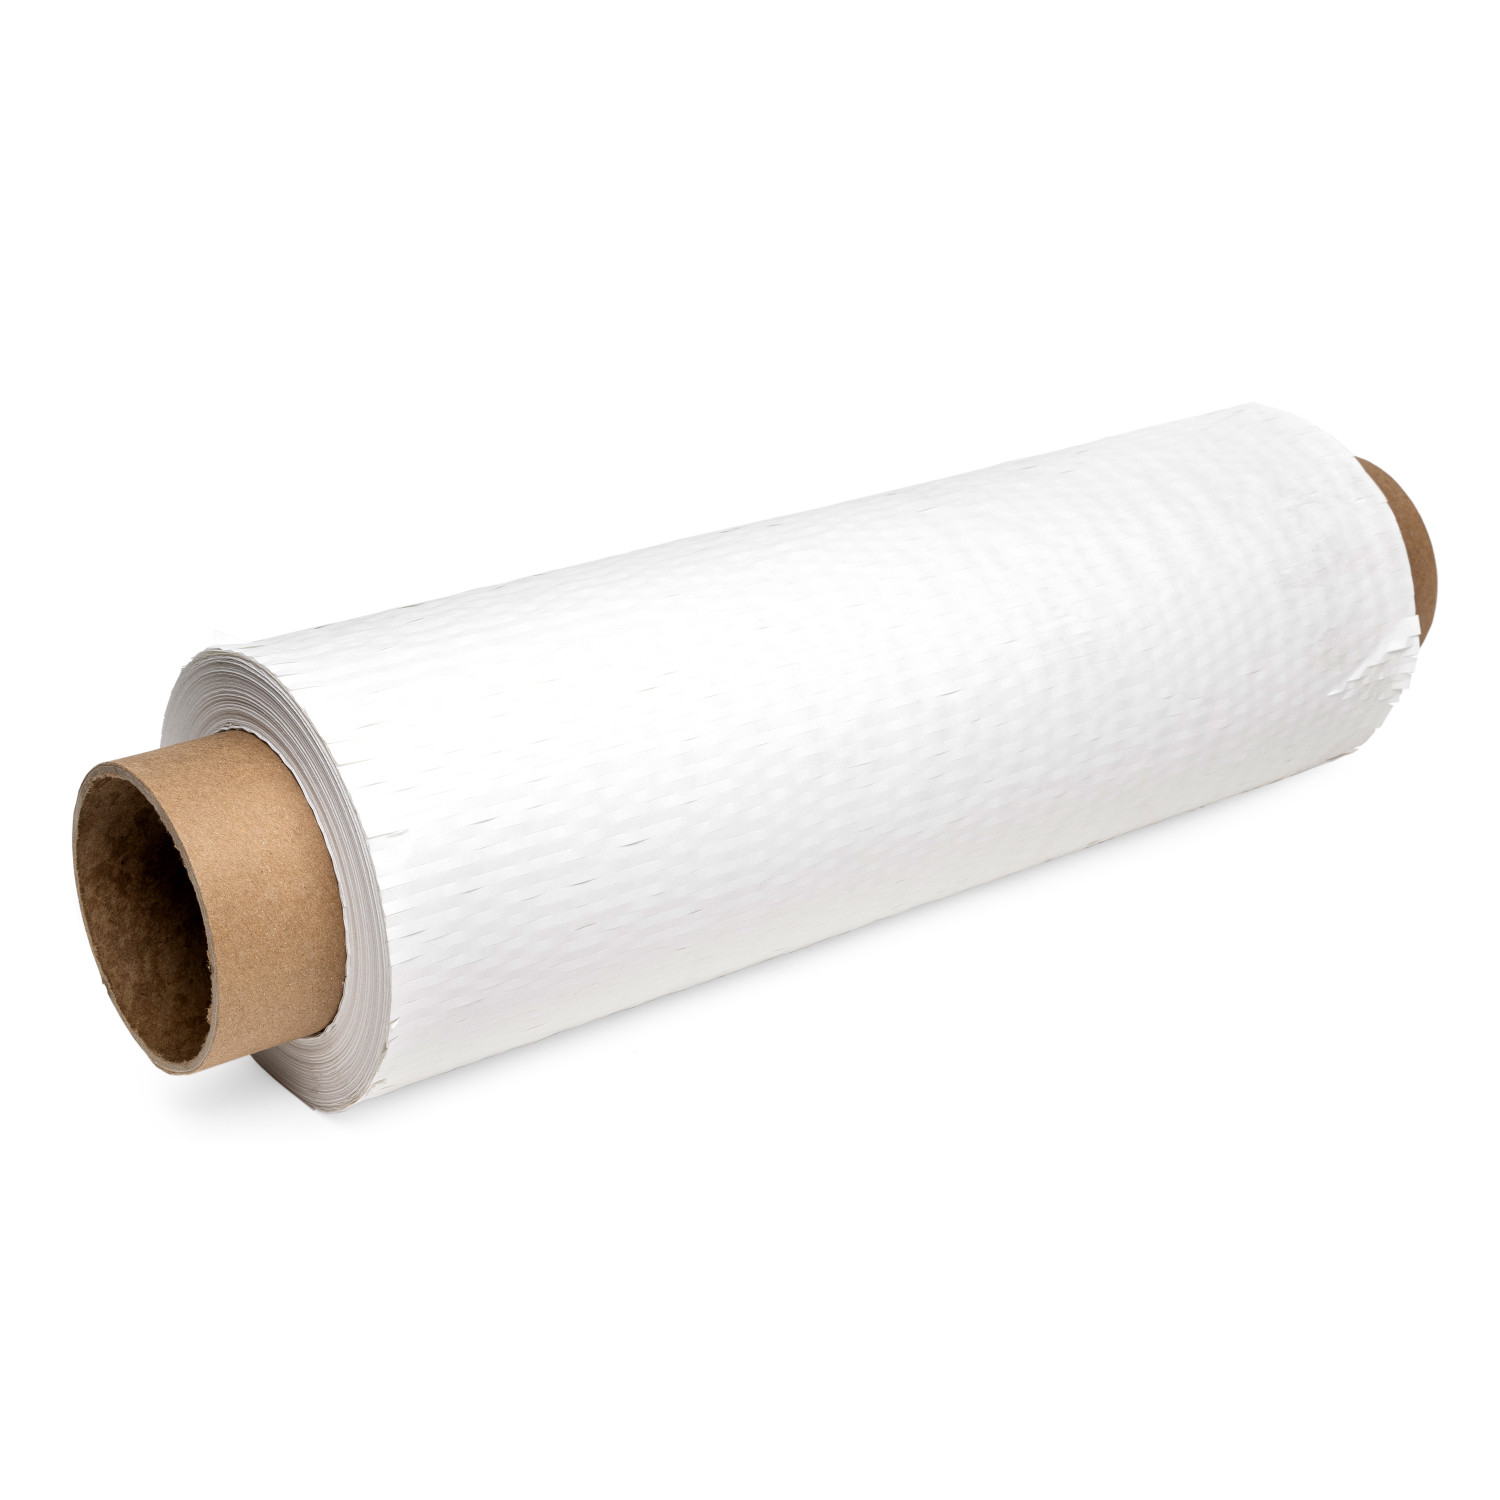 15 x 300' HexcelWrap Refill Roll for MP-300W Honeycomb Packing